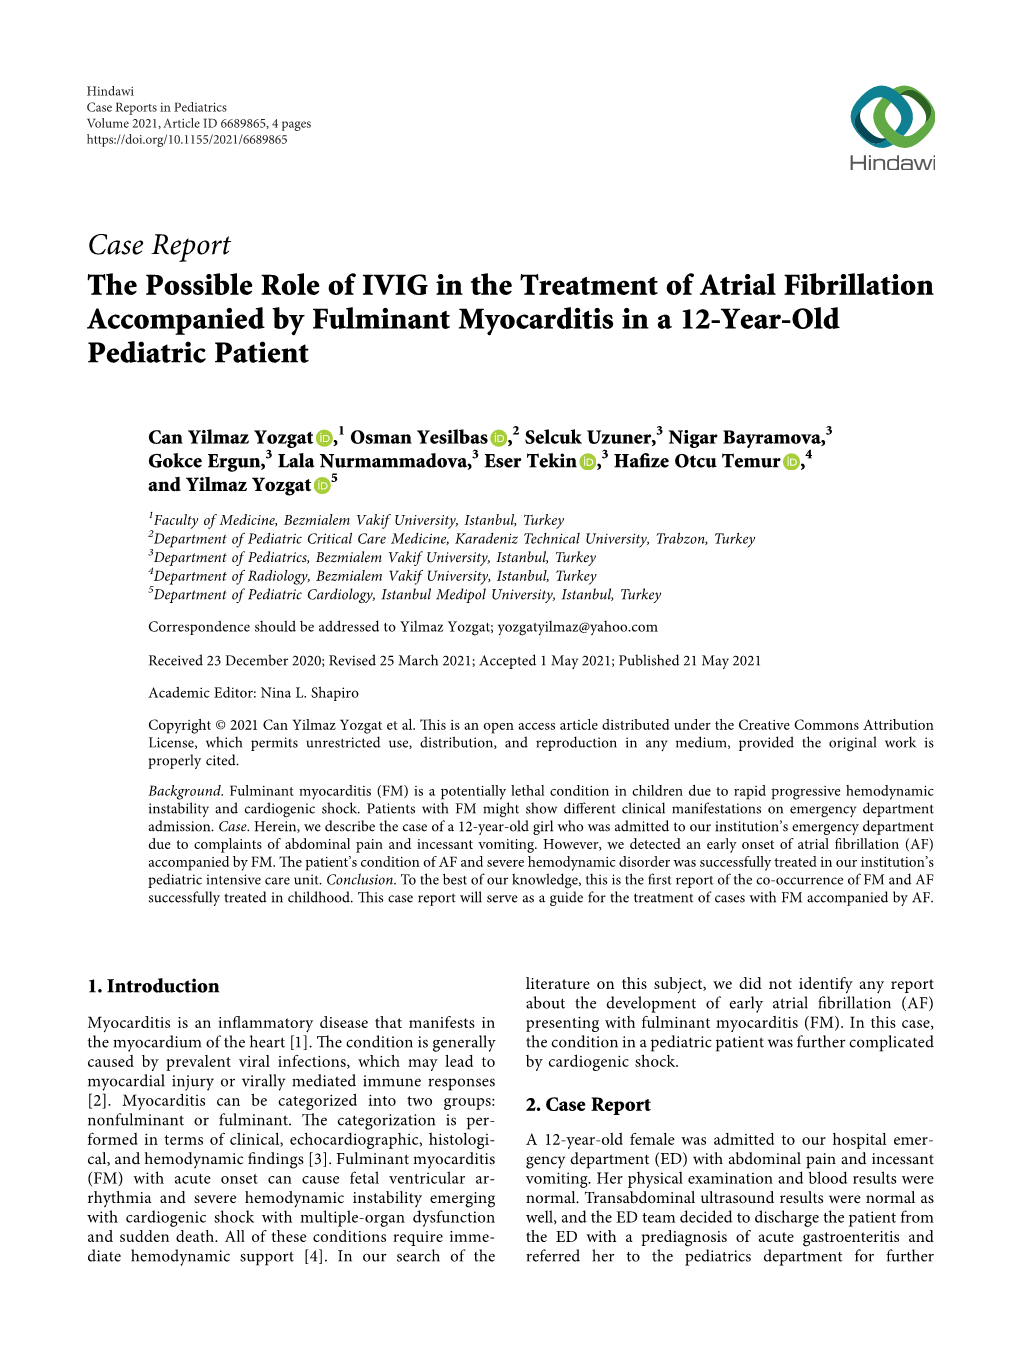 The Possible Role of IVIG in the Treatment of Atrial Fibrillation Accompanied by Fulminant Myocarditis in a 12-Year-Old Pediatric Patient